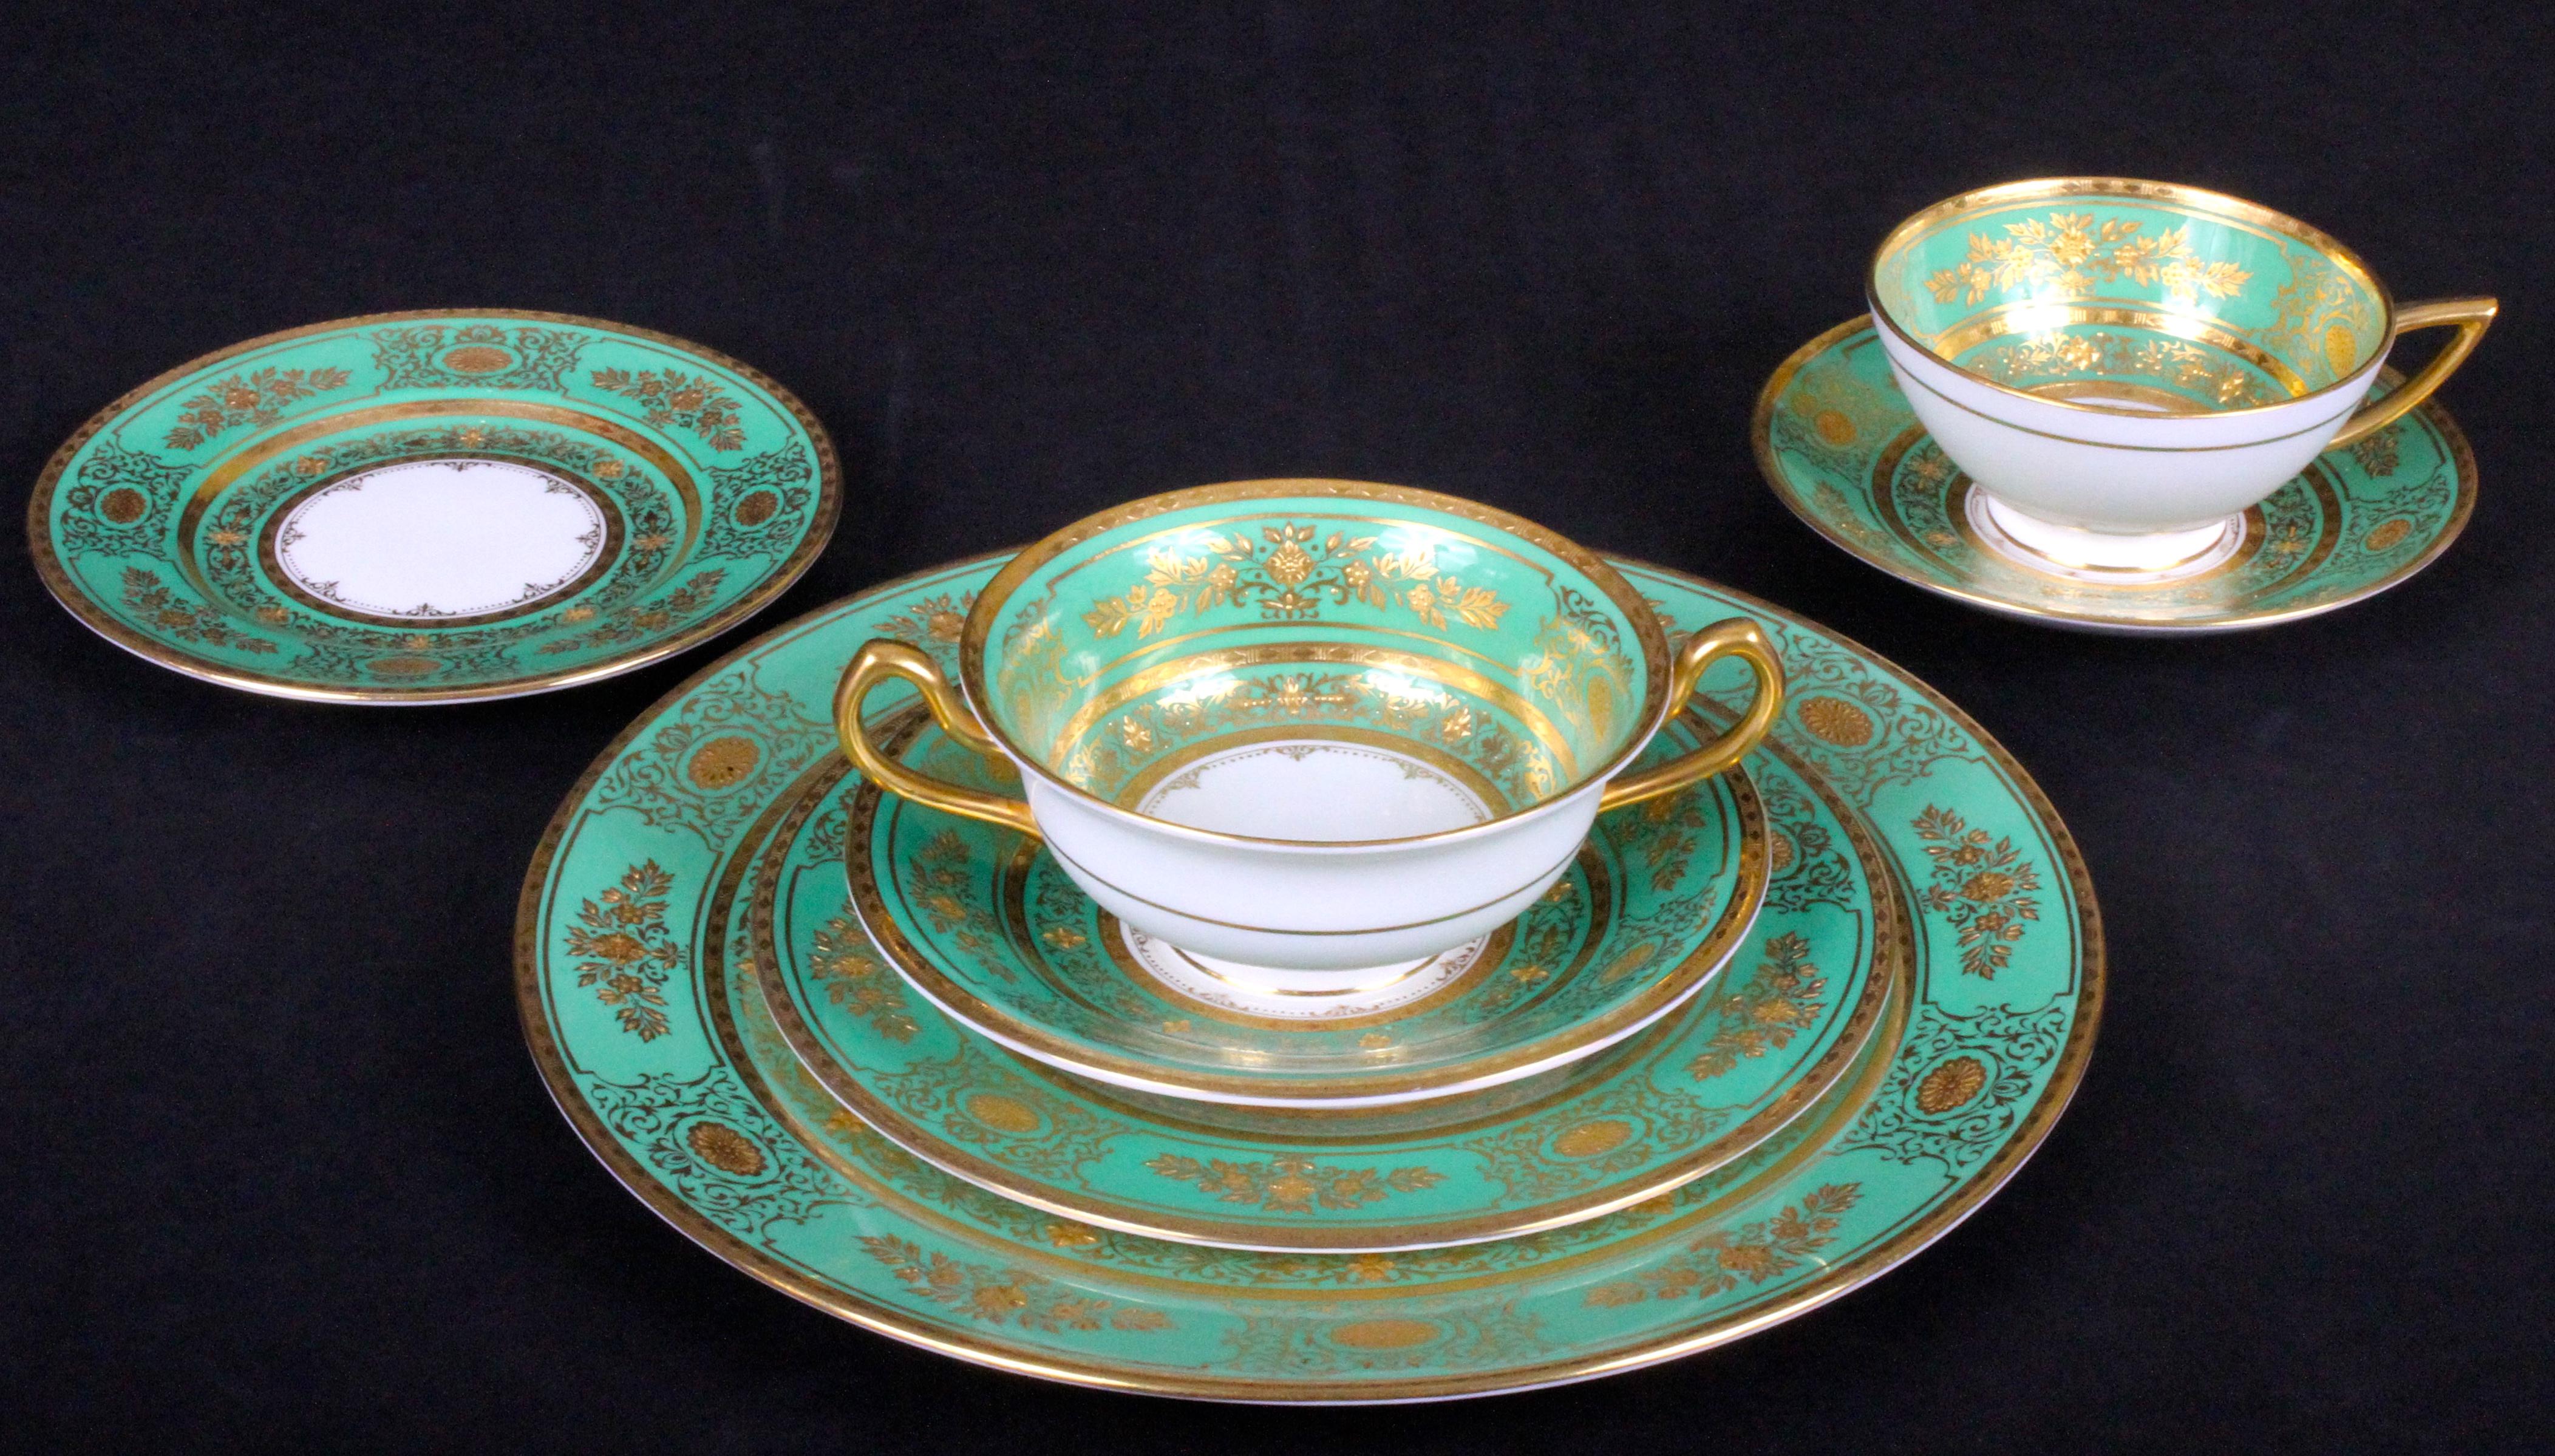 Here is a rarely available large gilded service for 18 in green from Minton, Stoke-on Trent, England. This ornate and beautiful pattern is called Argyle. The set includes dinner, salad or dessert and bread plates, soups bowls, cream soups and